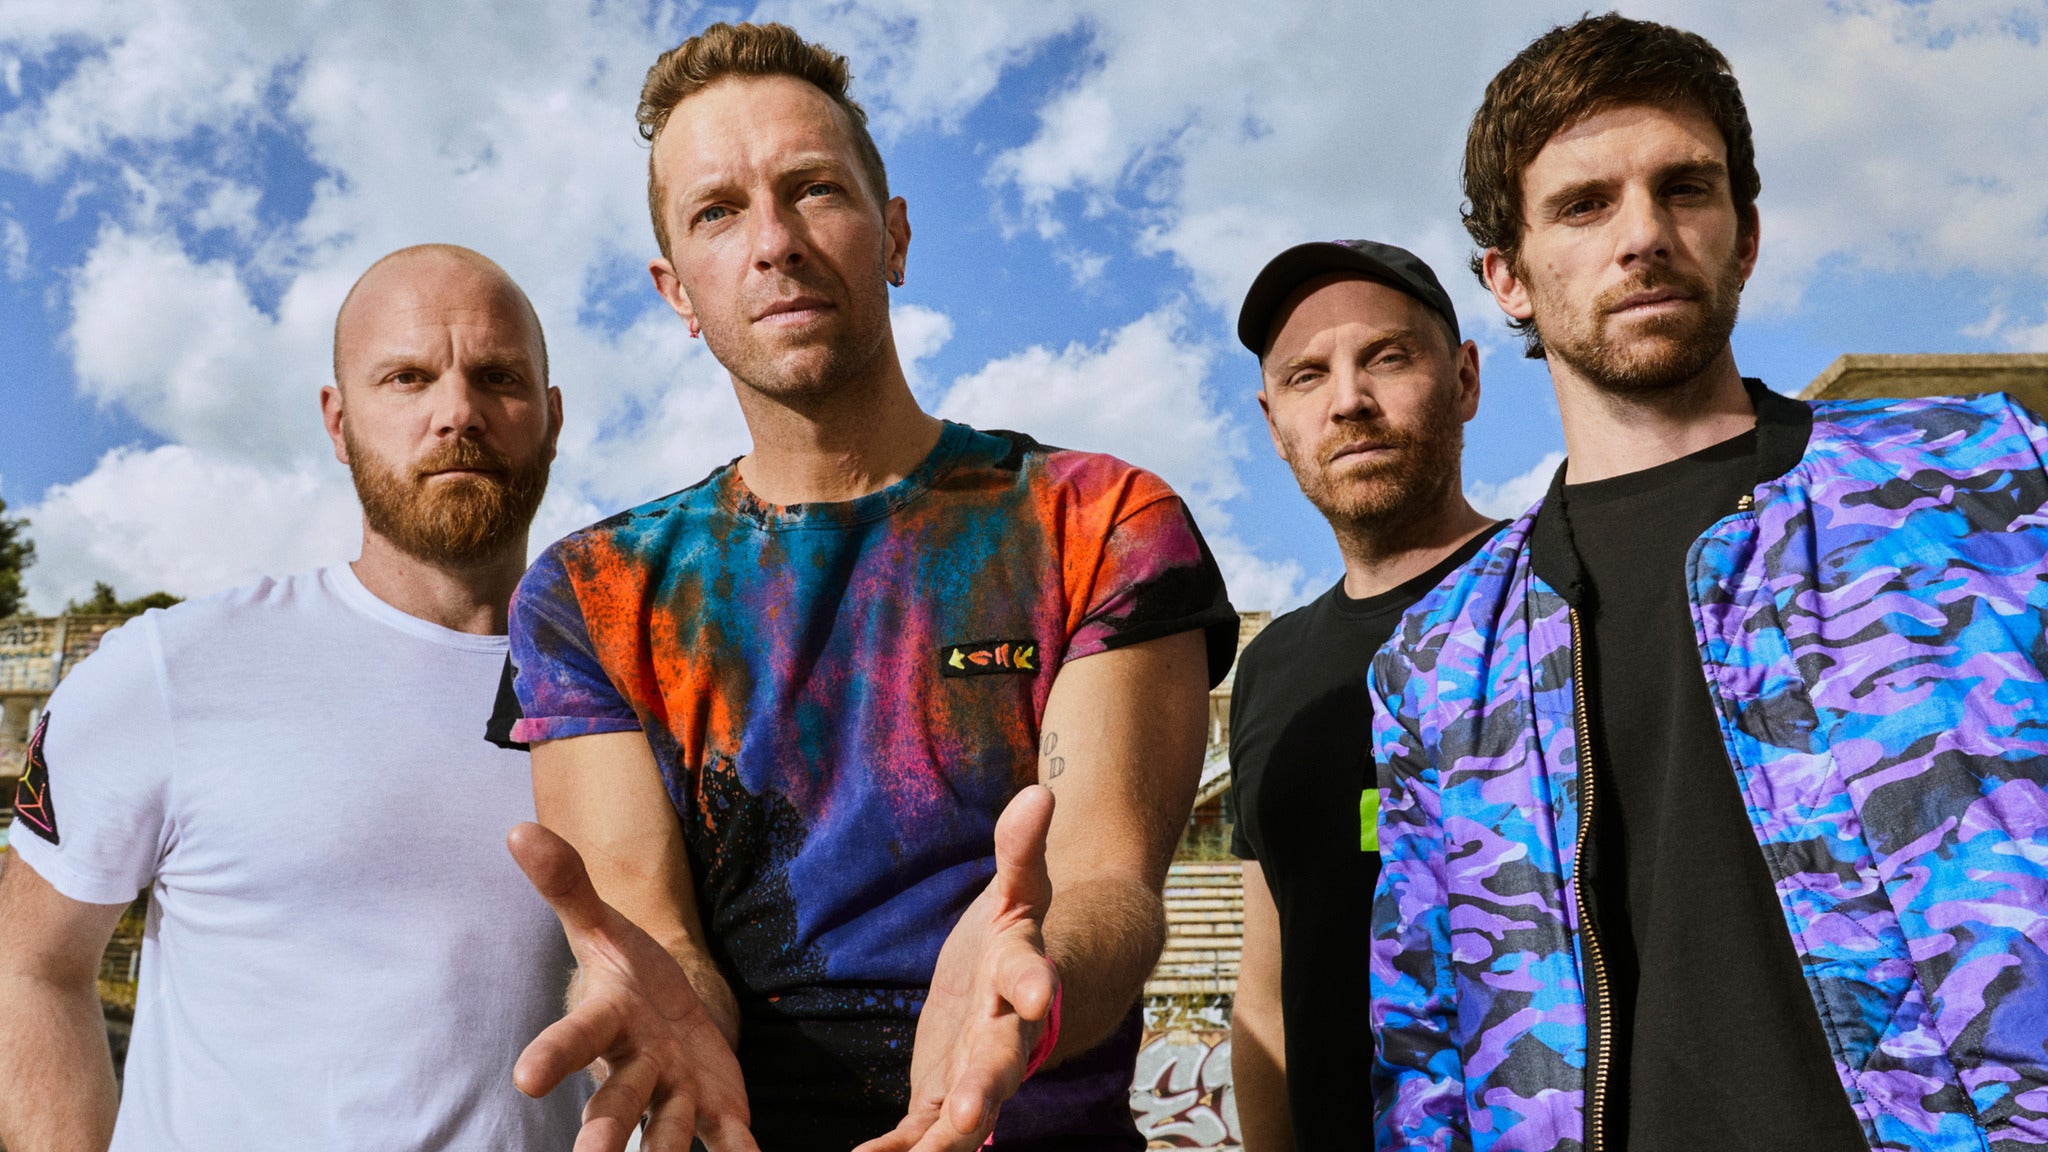 Image used with permission from Ticketmaster | Coldplay: Music Of The Spheres World Tour 2023 - Hotel Packages tickets